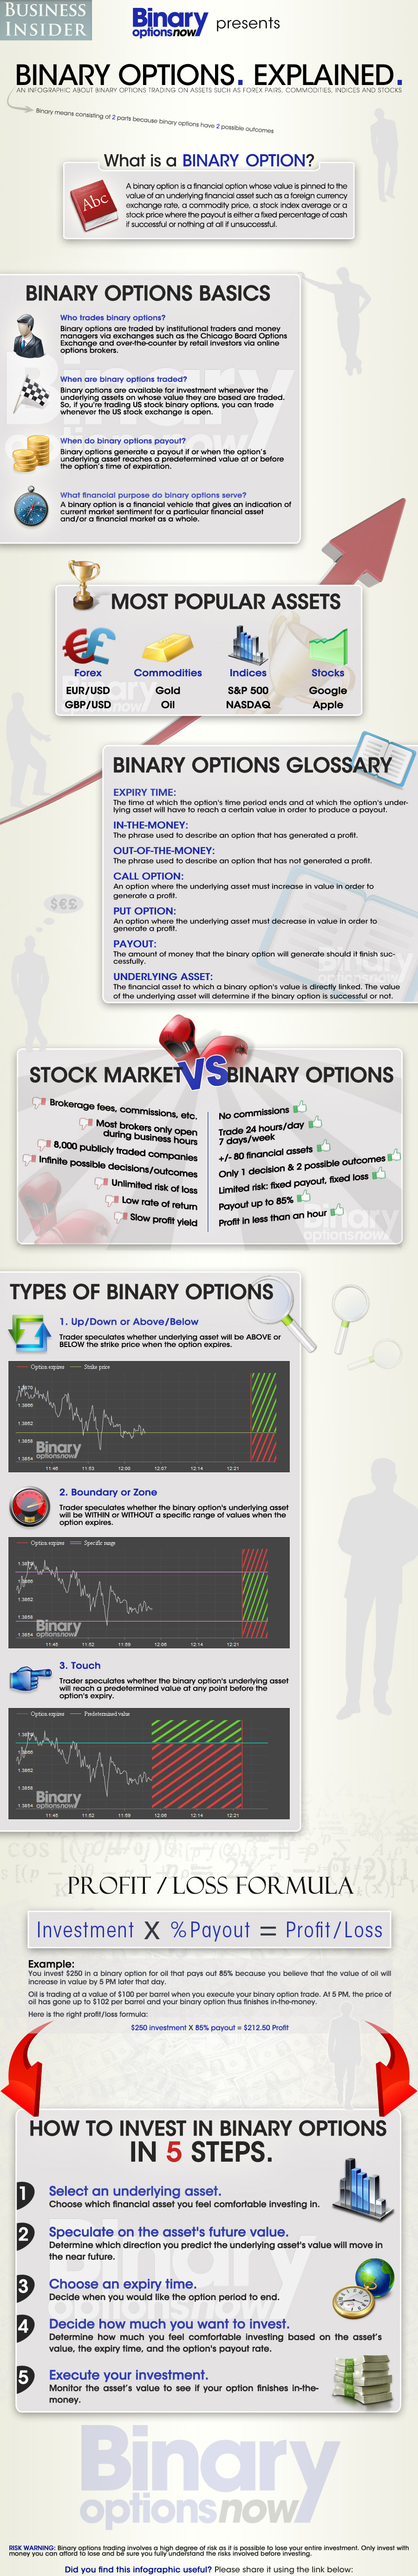 Binary options business for sale